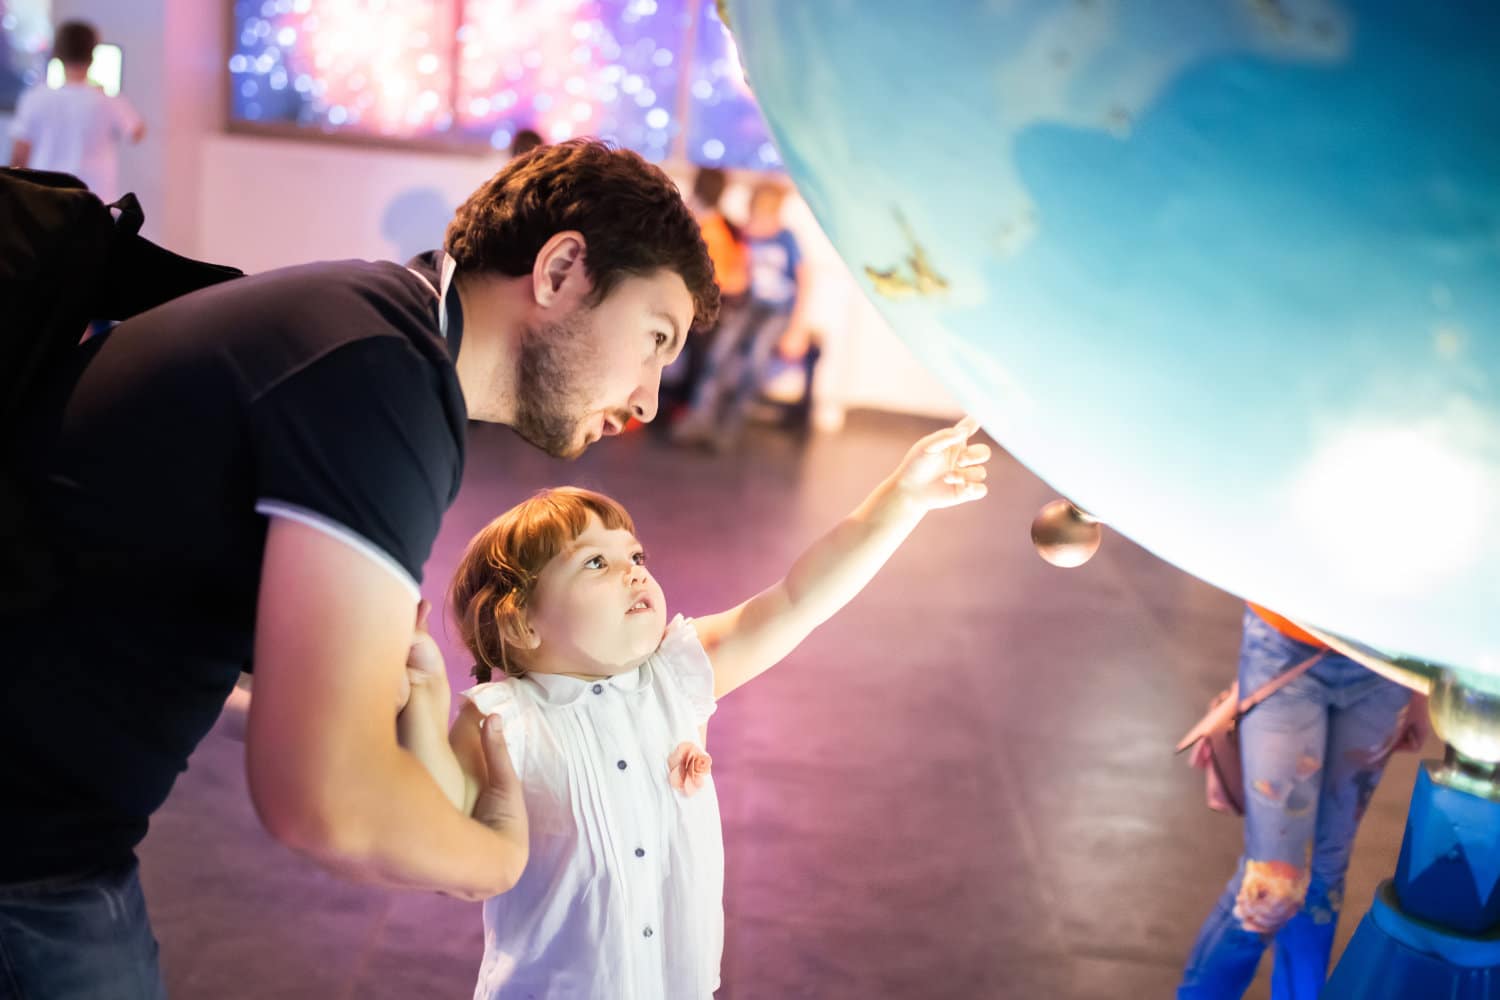 MOSCOW, RUSSIA - JULY 6: Exhibition in Moscow Planetarium. Father and his little daughter looking at the exhibits of the one of the world`s largest planetarium.